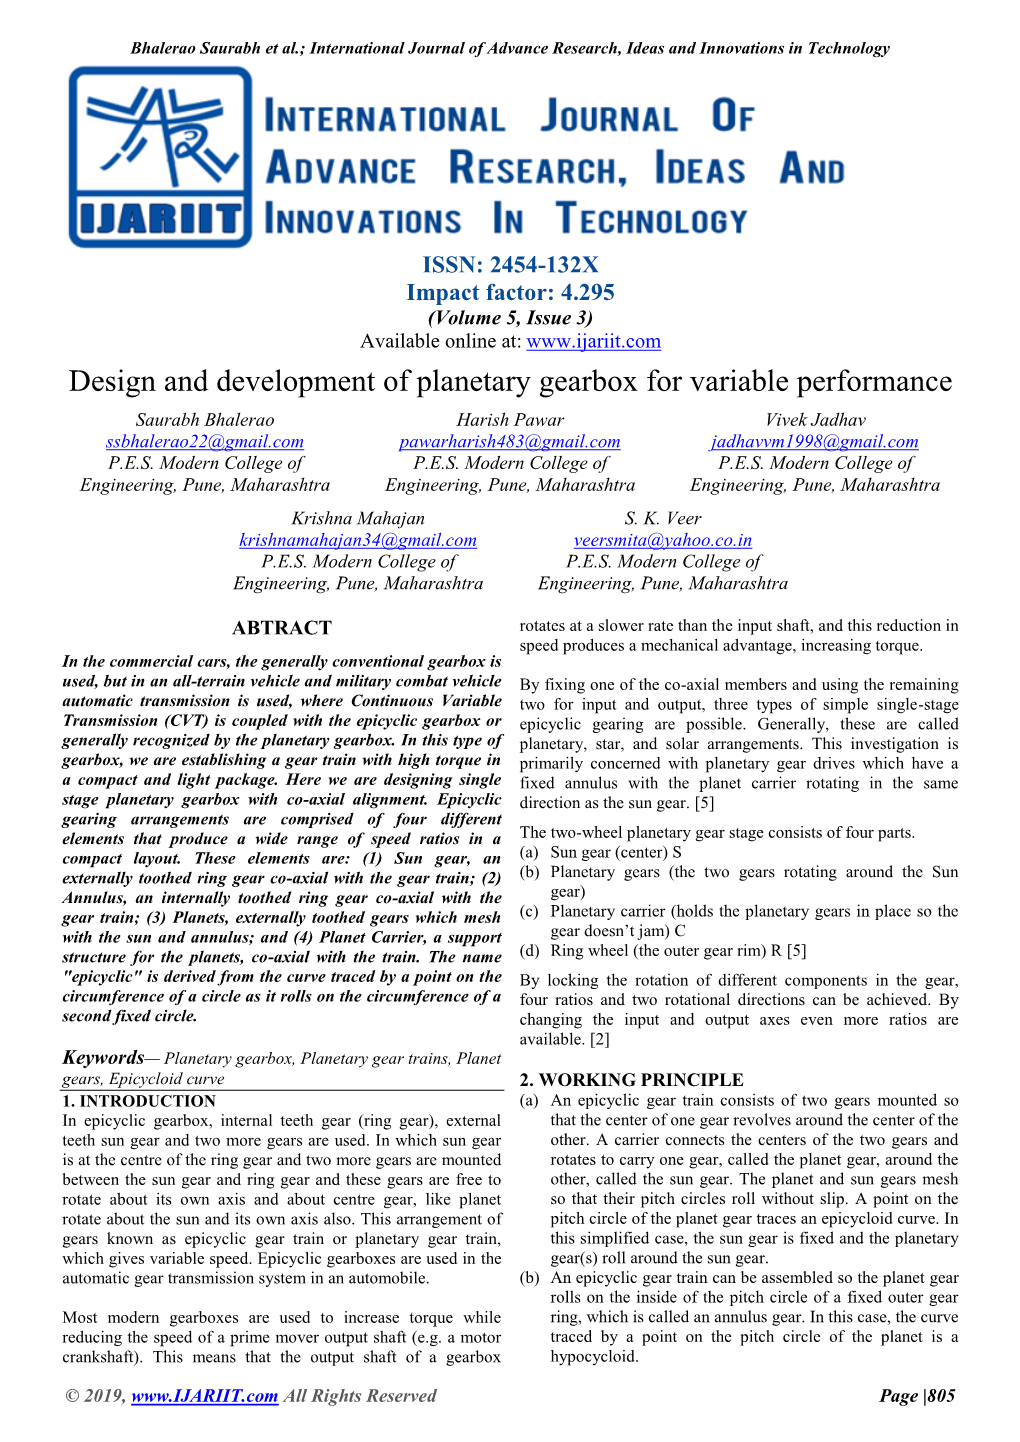 Design and Development of Planetary Gearbox for Variable Performance